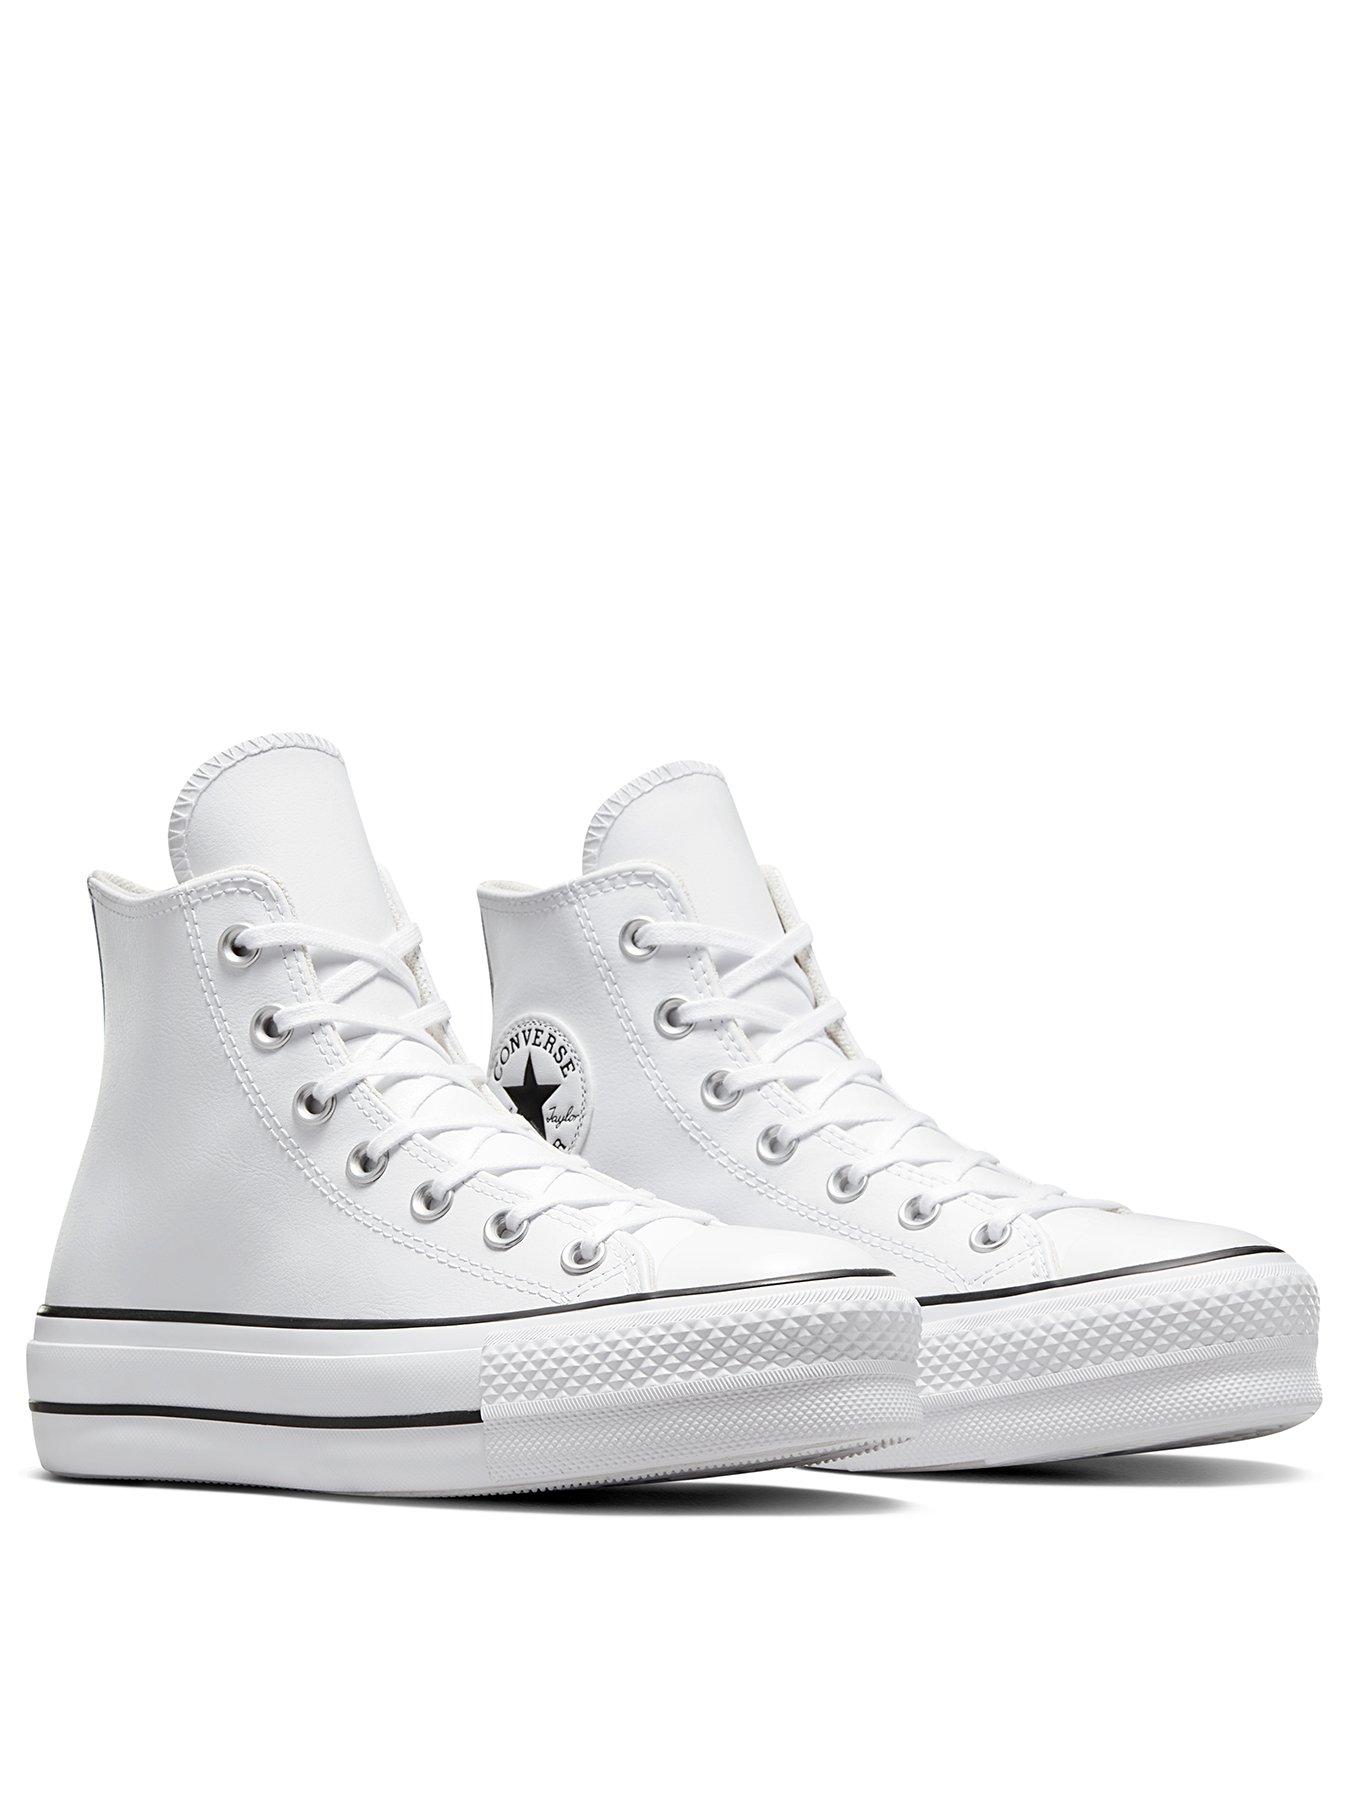 Converse Womens Leather Lift Hi Top Trainers - White/Black | Very.co.uk